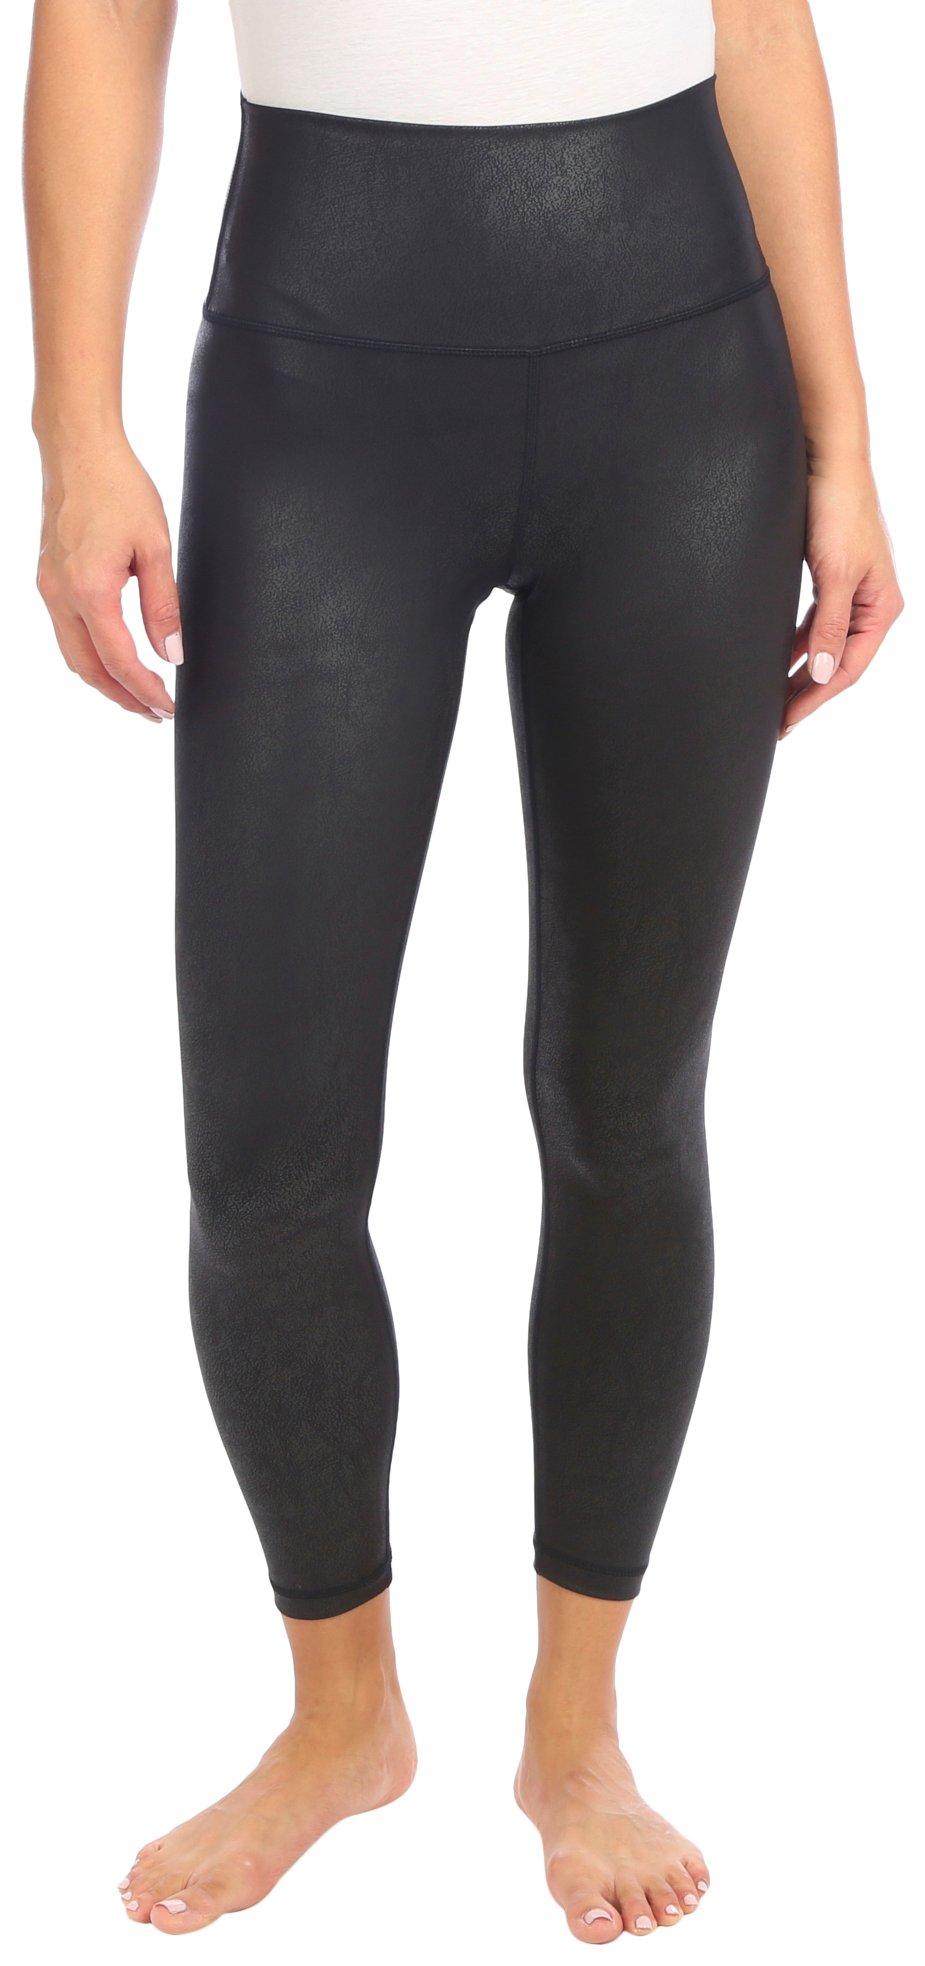  Jockey Womens Cotton Stretch Basic Ankle with Side Leggings,  Deep Black, 2X US : Sports & Outdoors